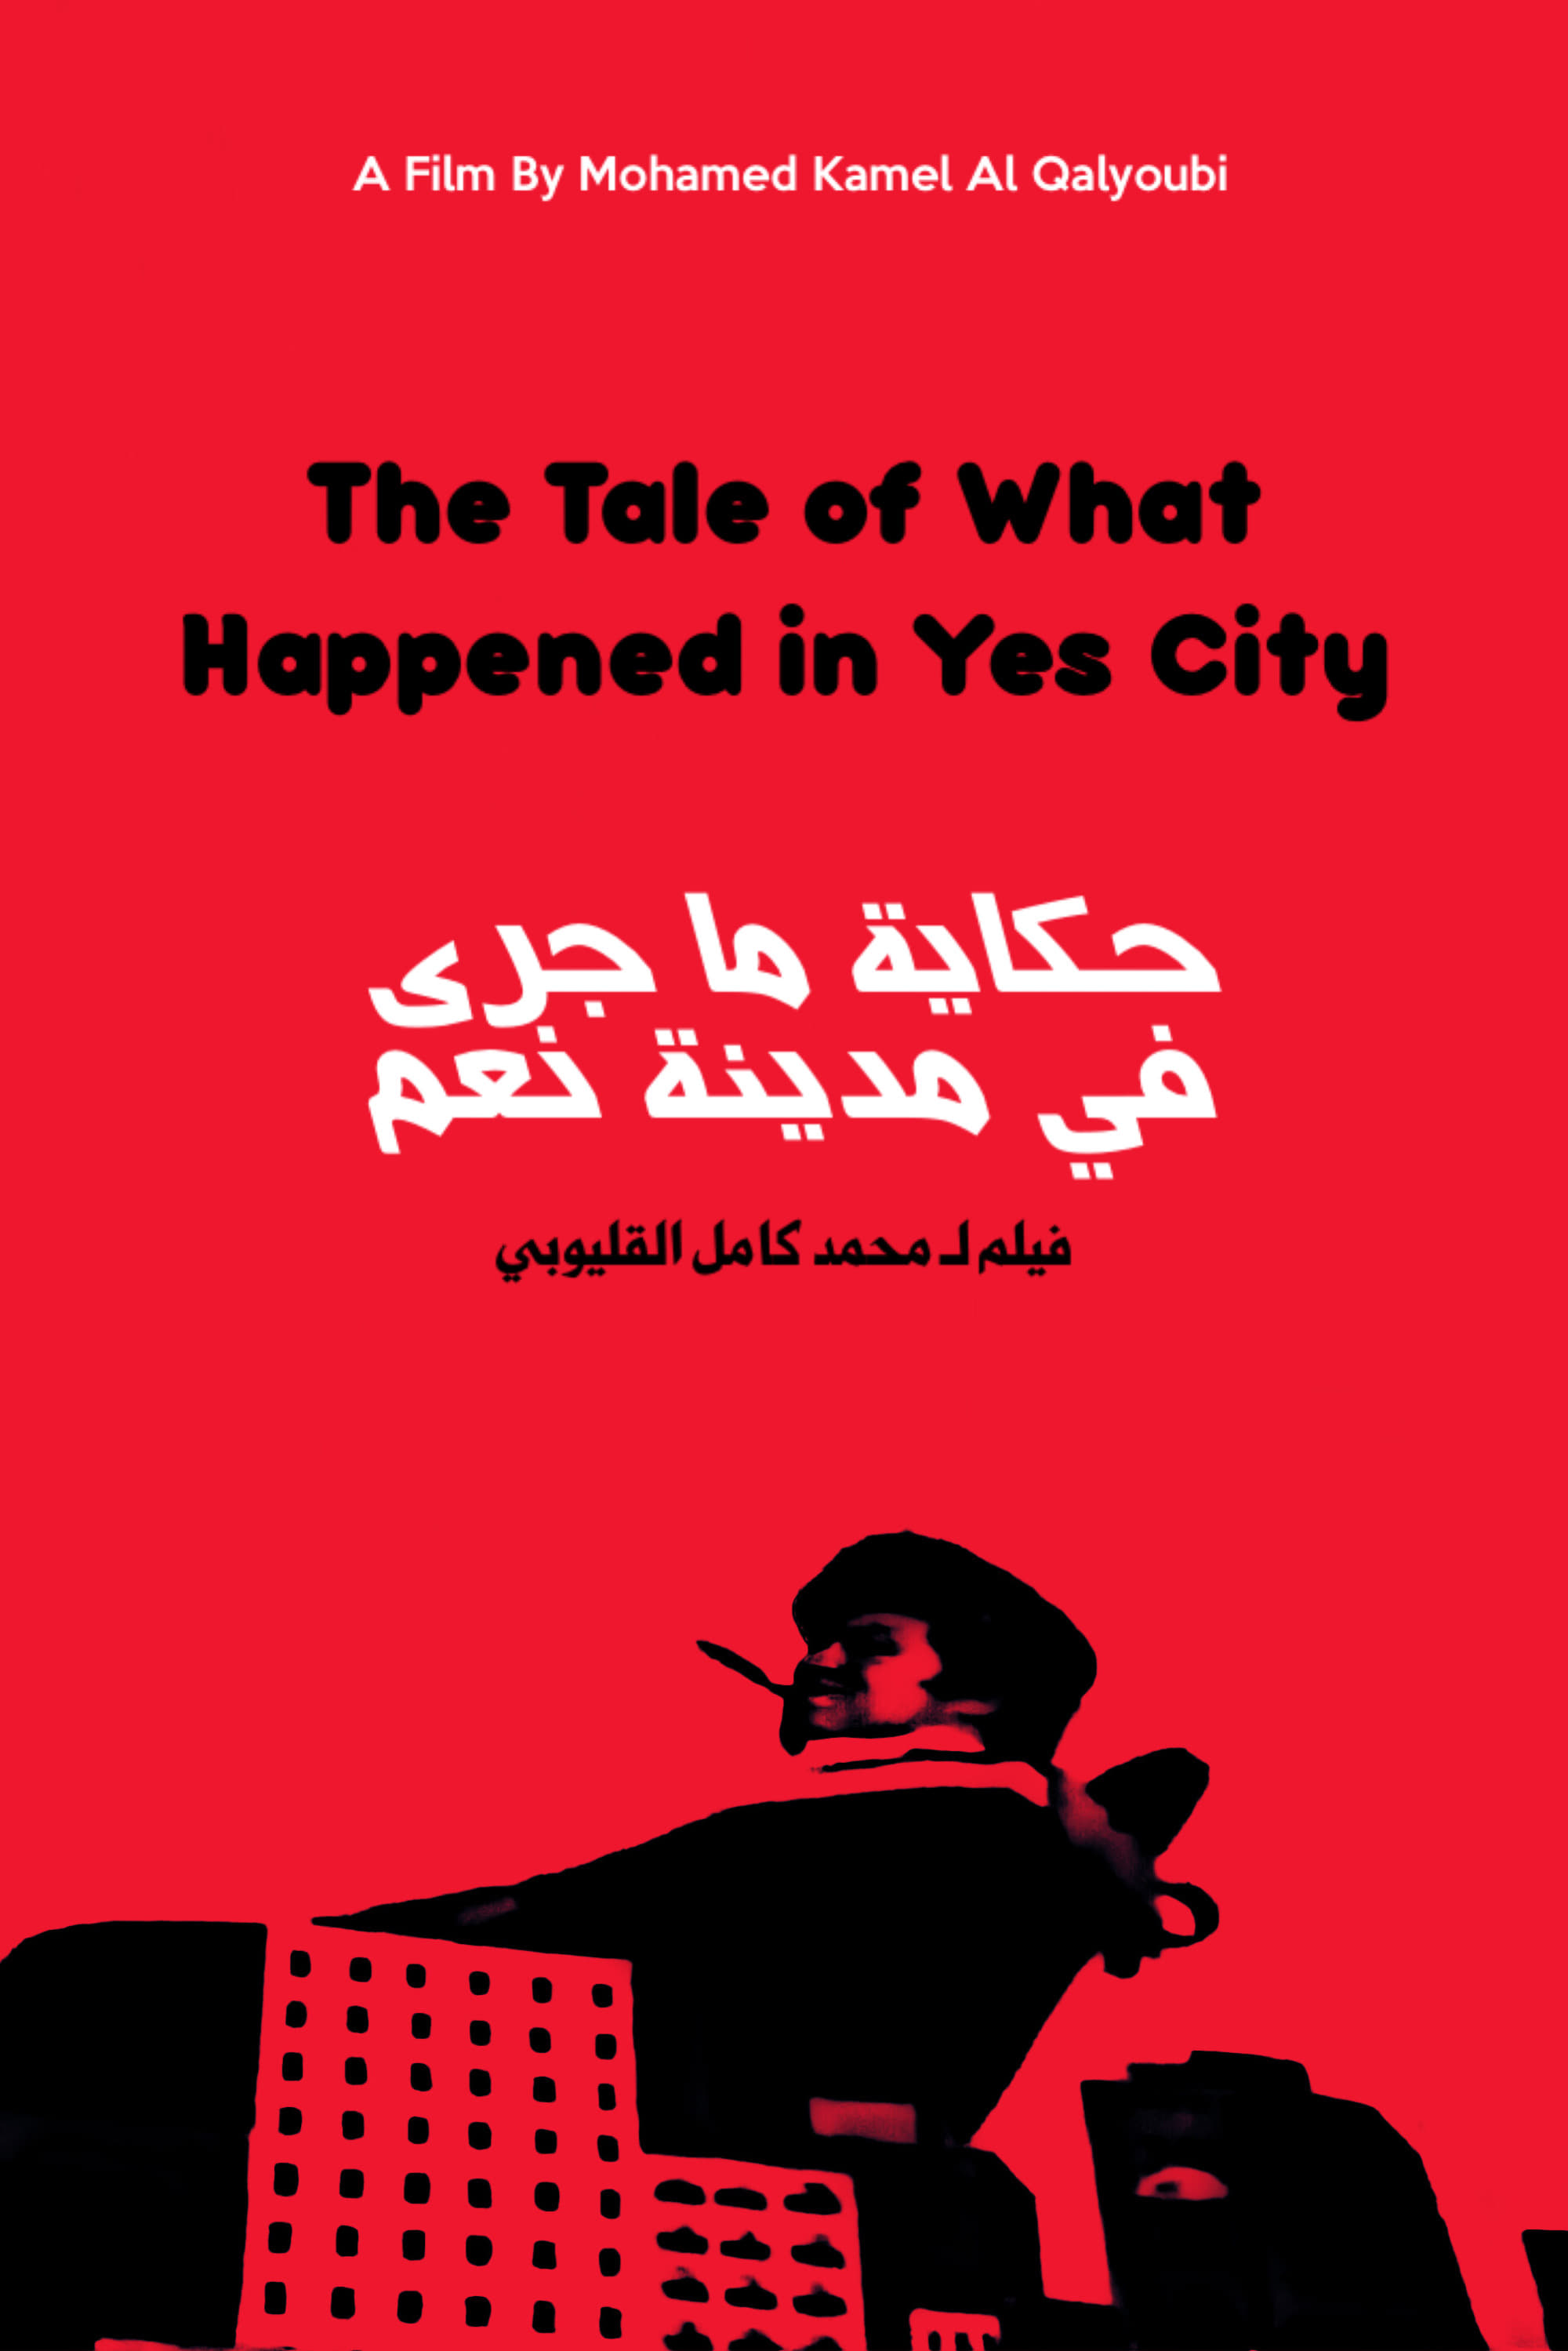 The Tale of What Happened in Yes City